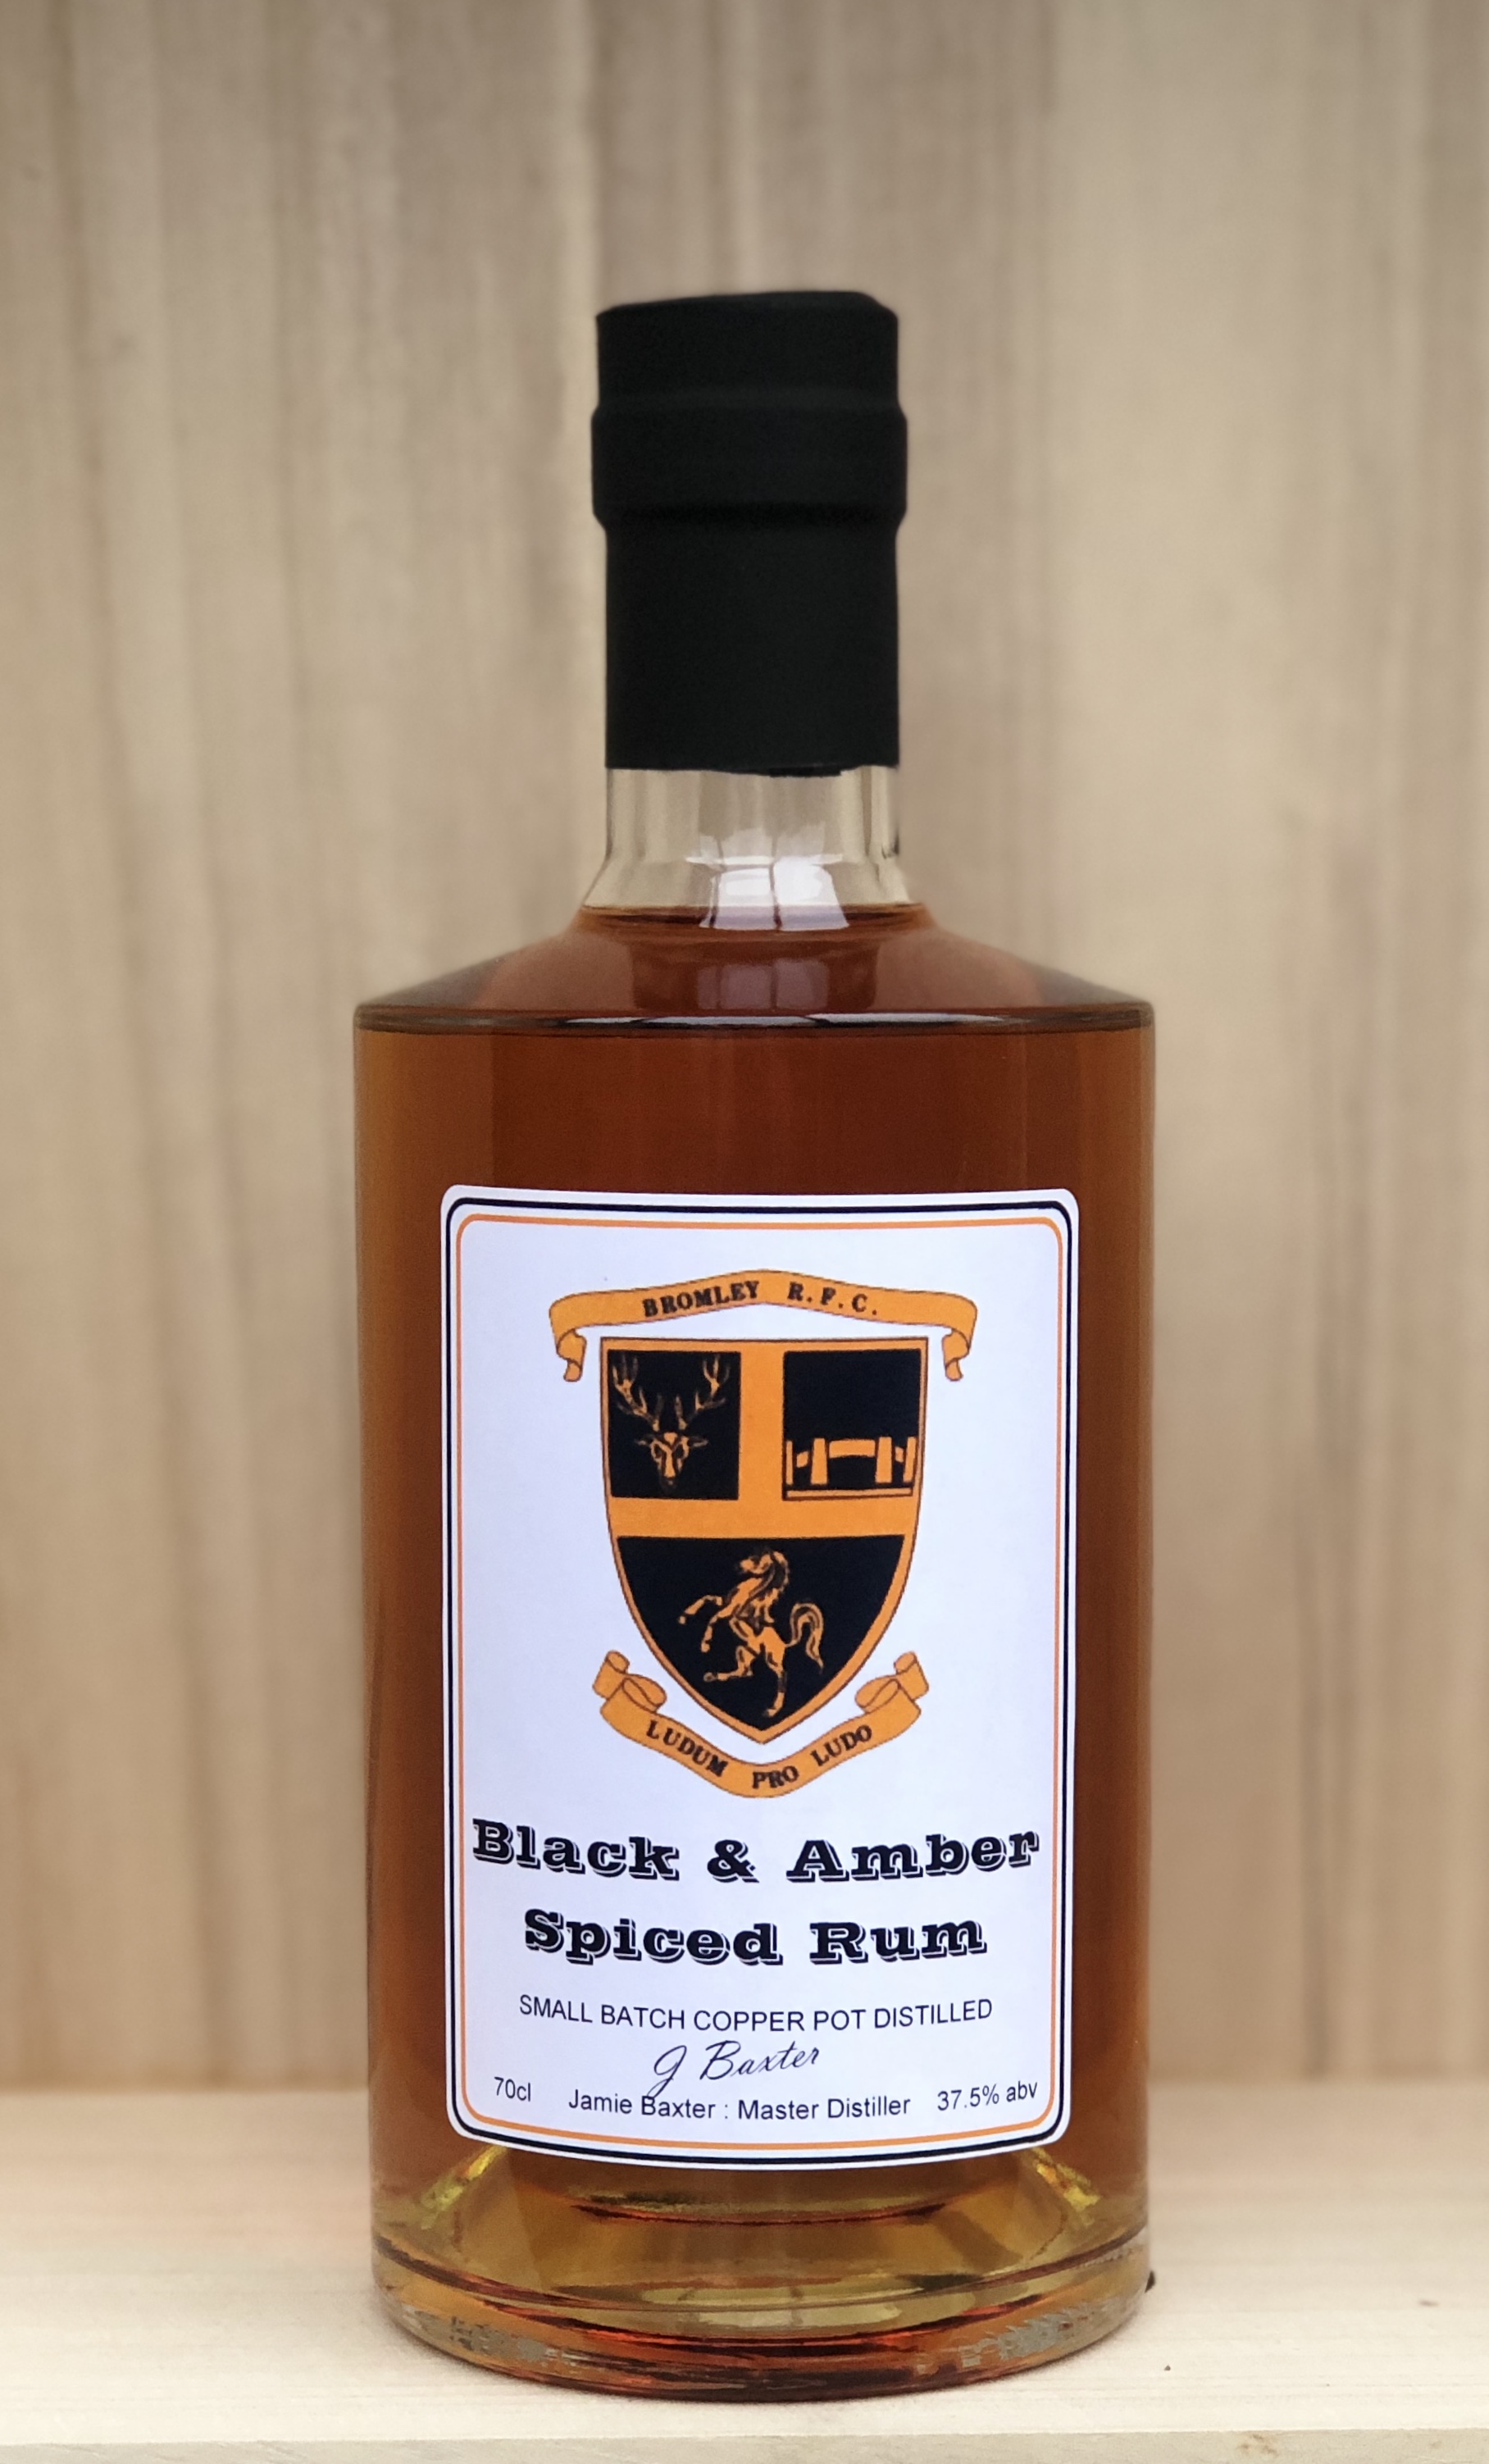 Bromley 'Black & Amber' Spiced Rum